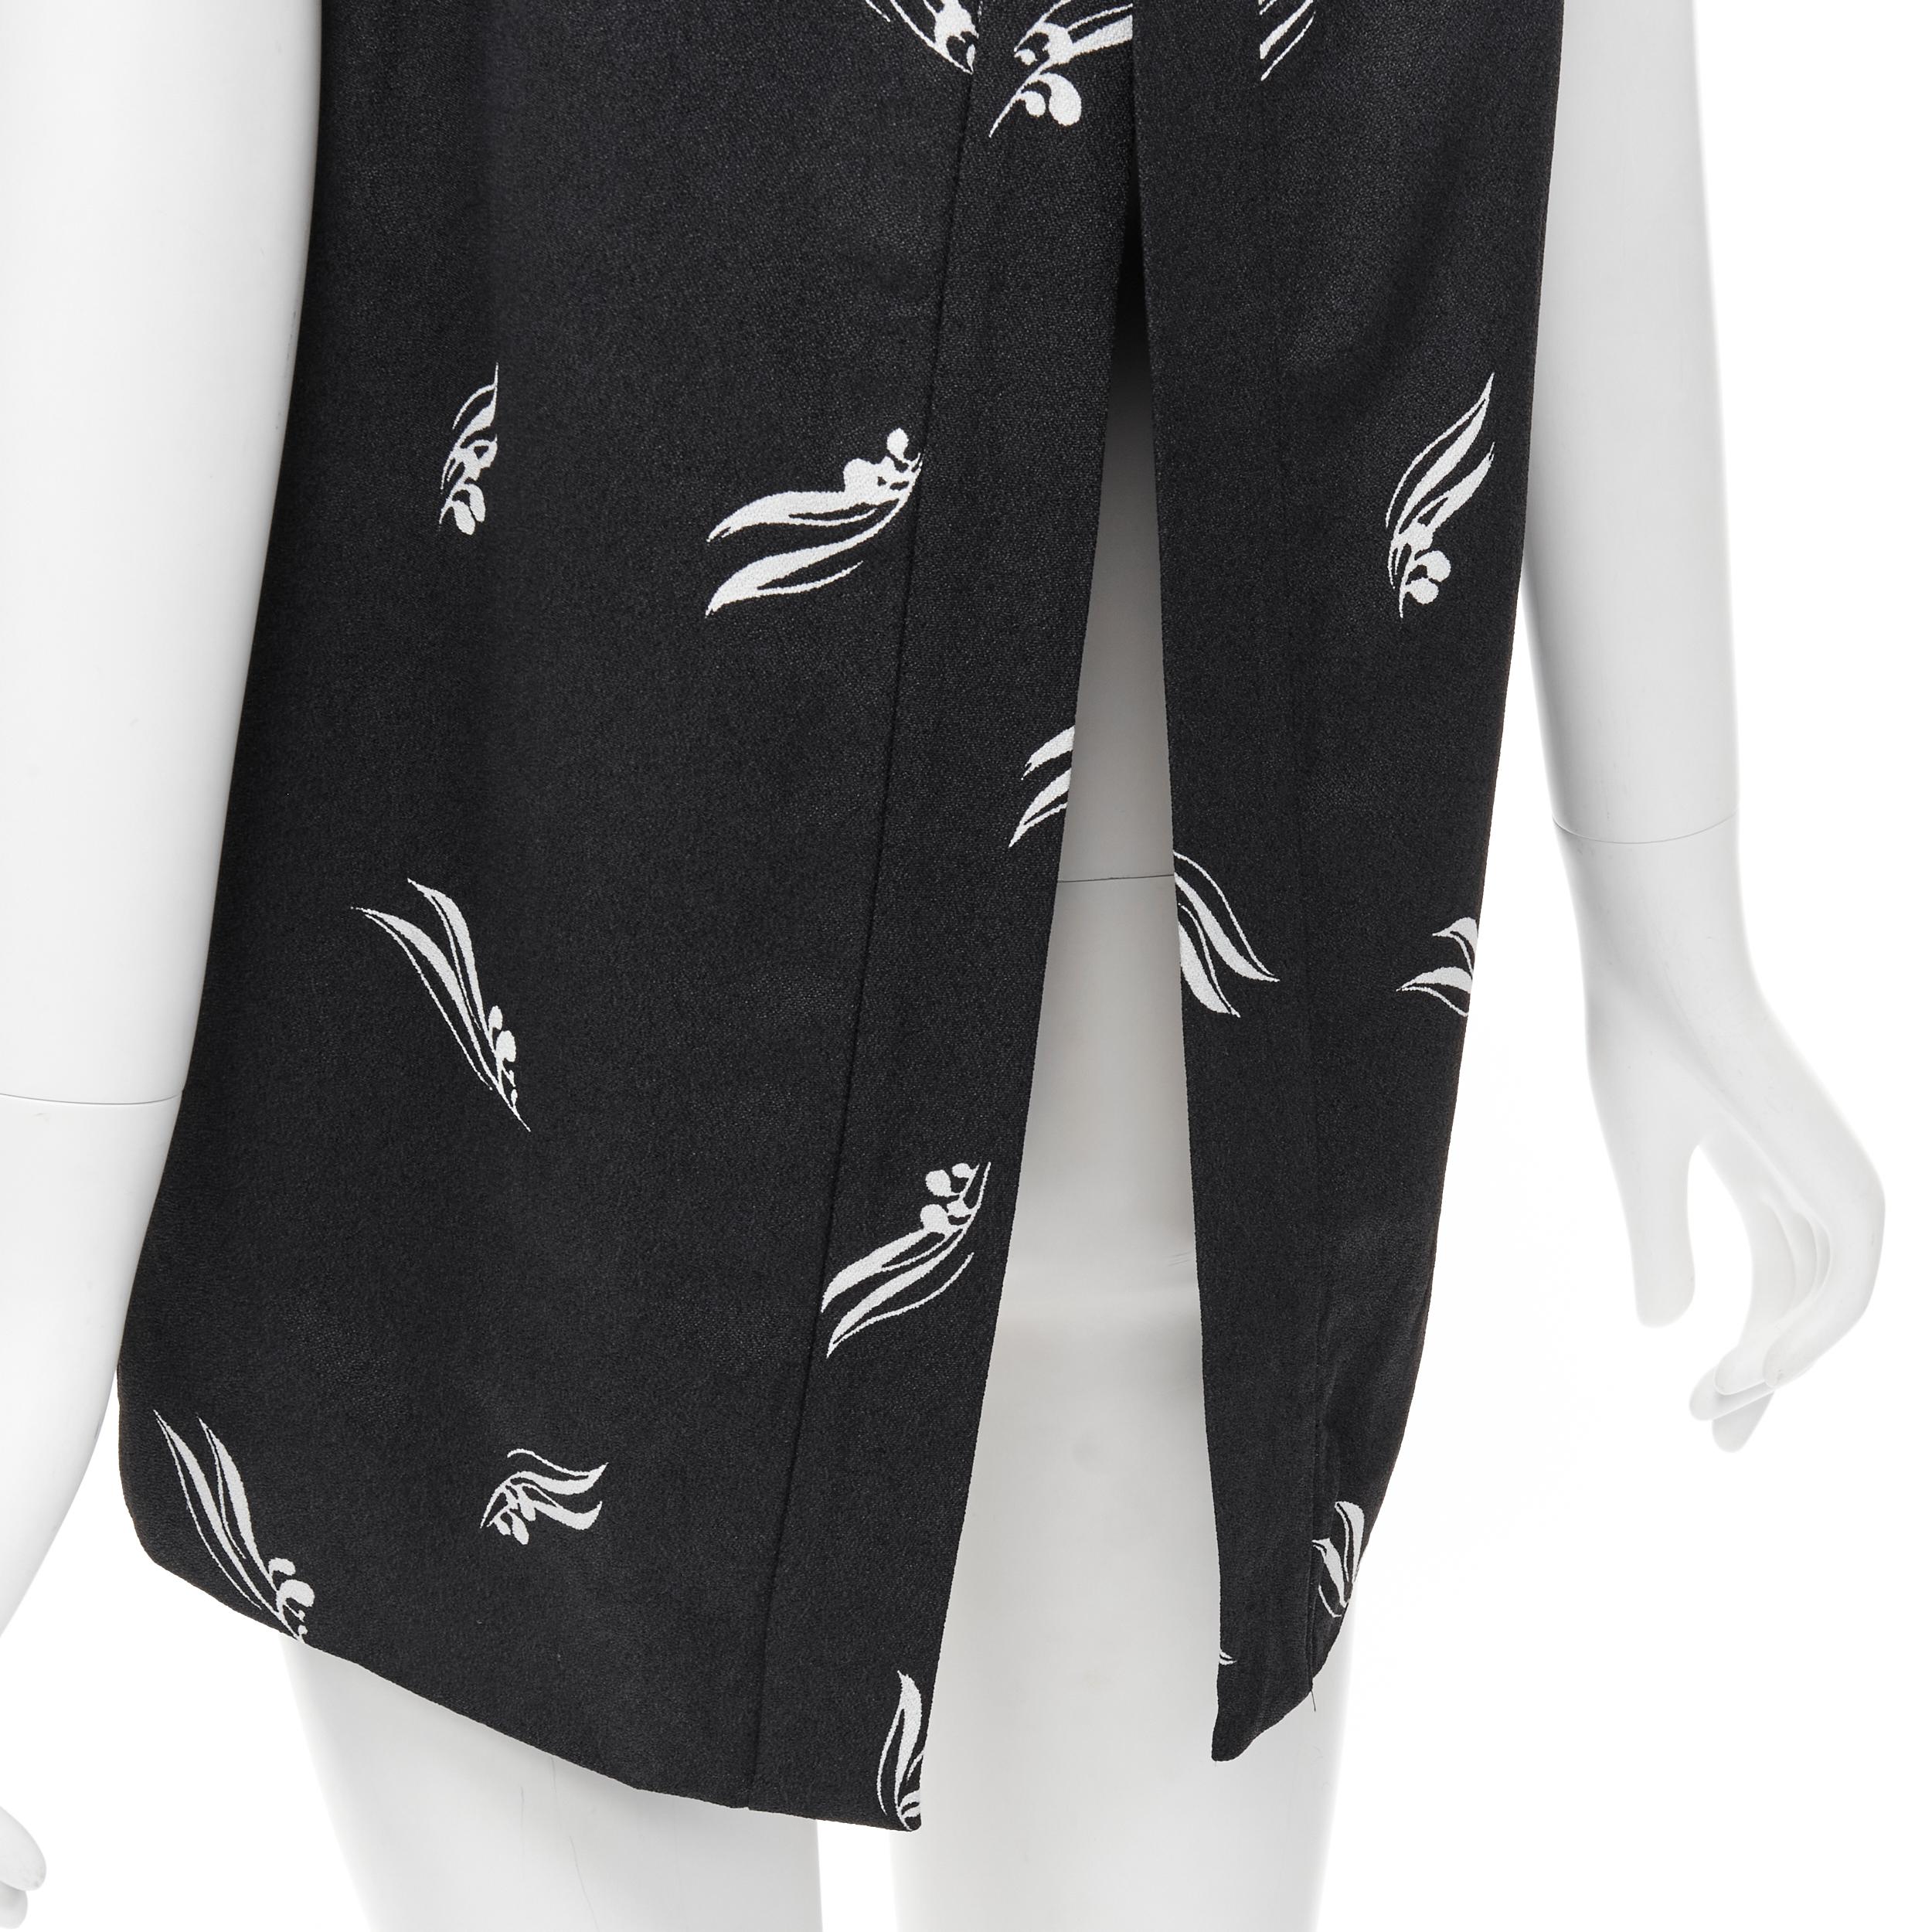 MARNI black white print crepe open split back sleeveless top IT40 S 
Reference: CELG/A00141 
Brand: Marni 
Material: Viscose 
Color: Black 
Pattern: Floral 
Closure: Button 
Made in: Italy 

CONDITION: 
Condition: Excellent, this item was pre-owned